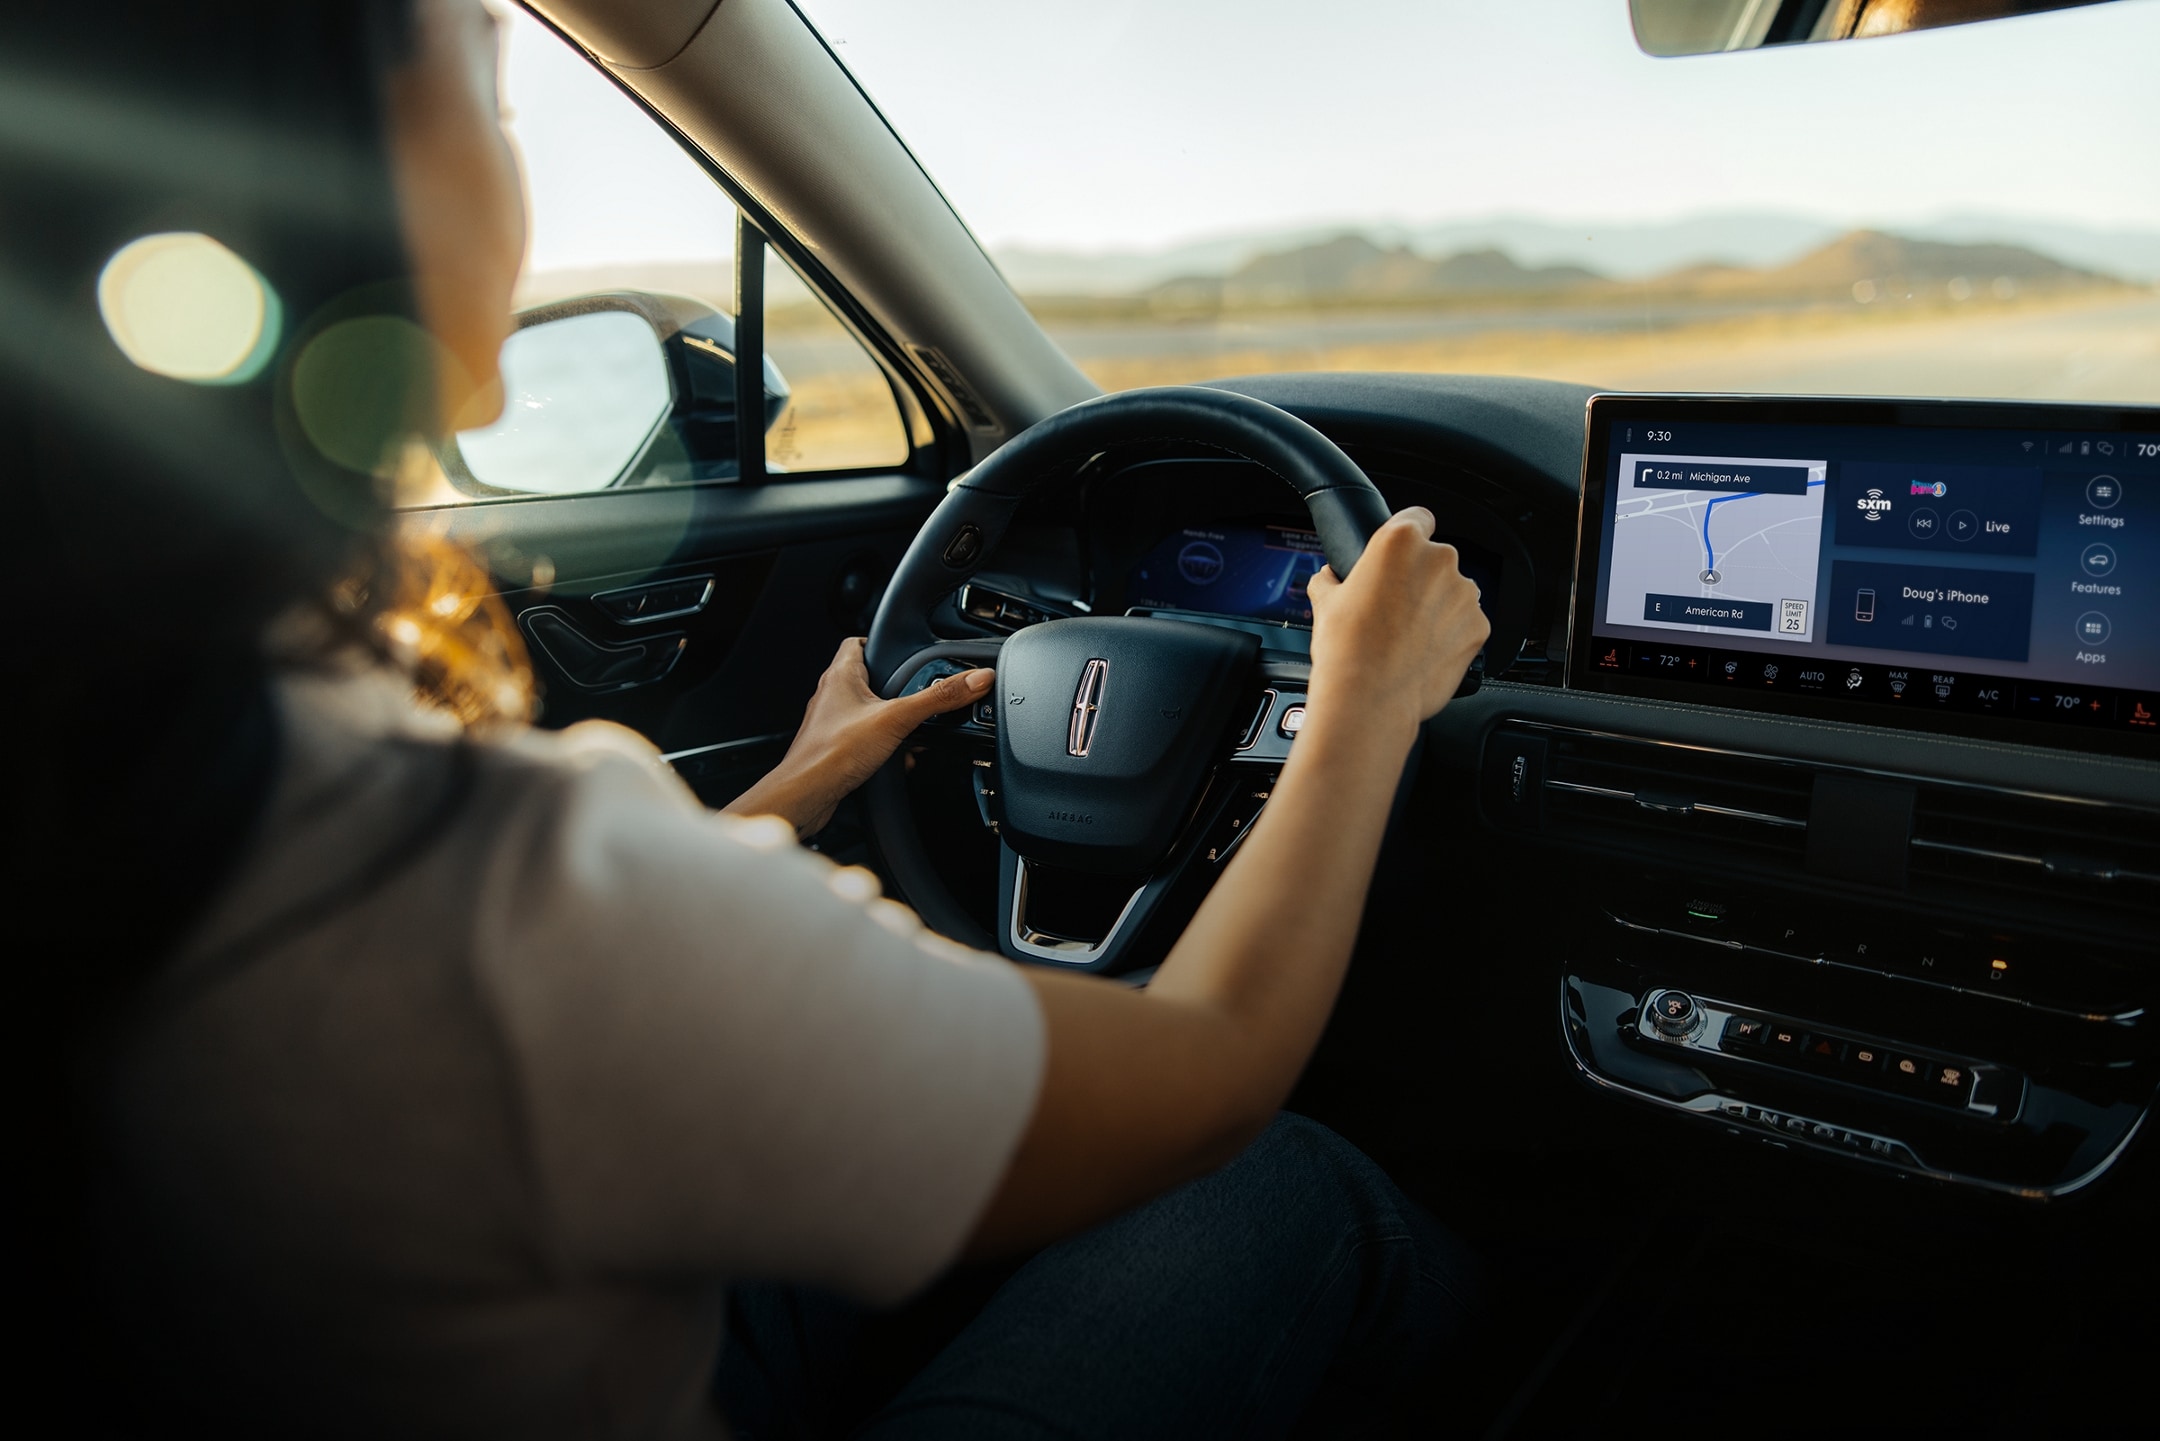 A woman is shown driving a Lincoln vehicle on a desert road with a map on the center-stack display.